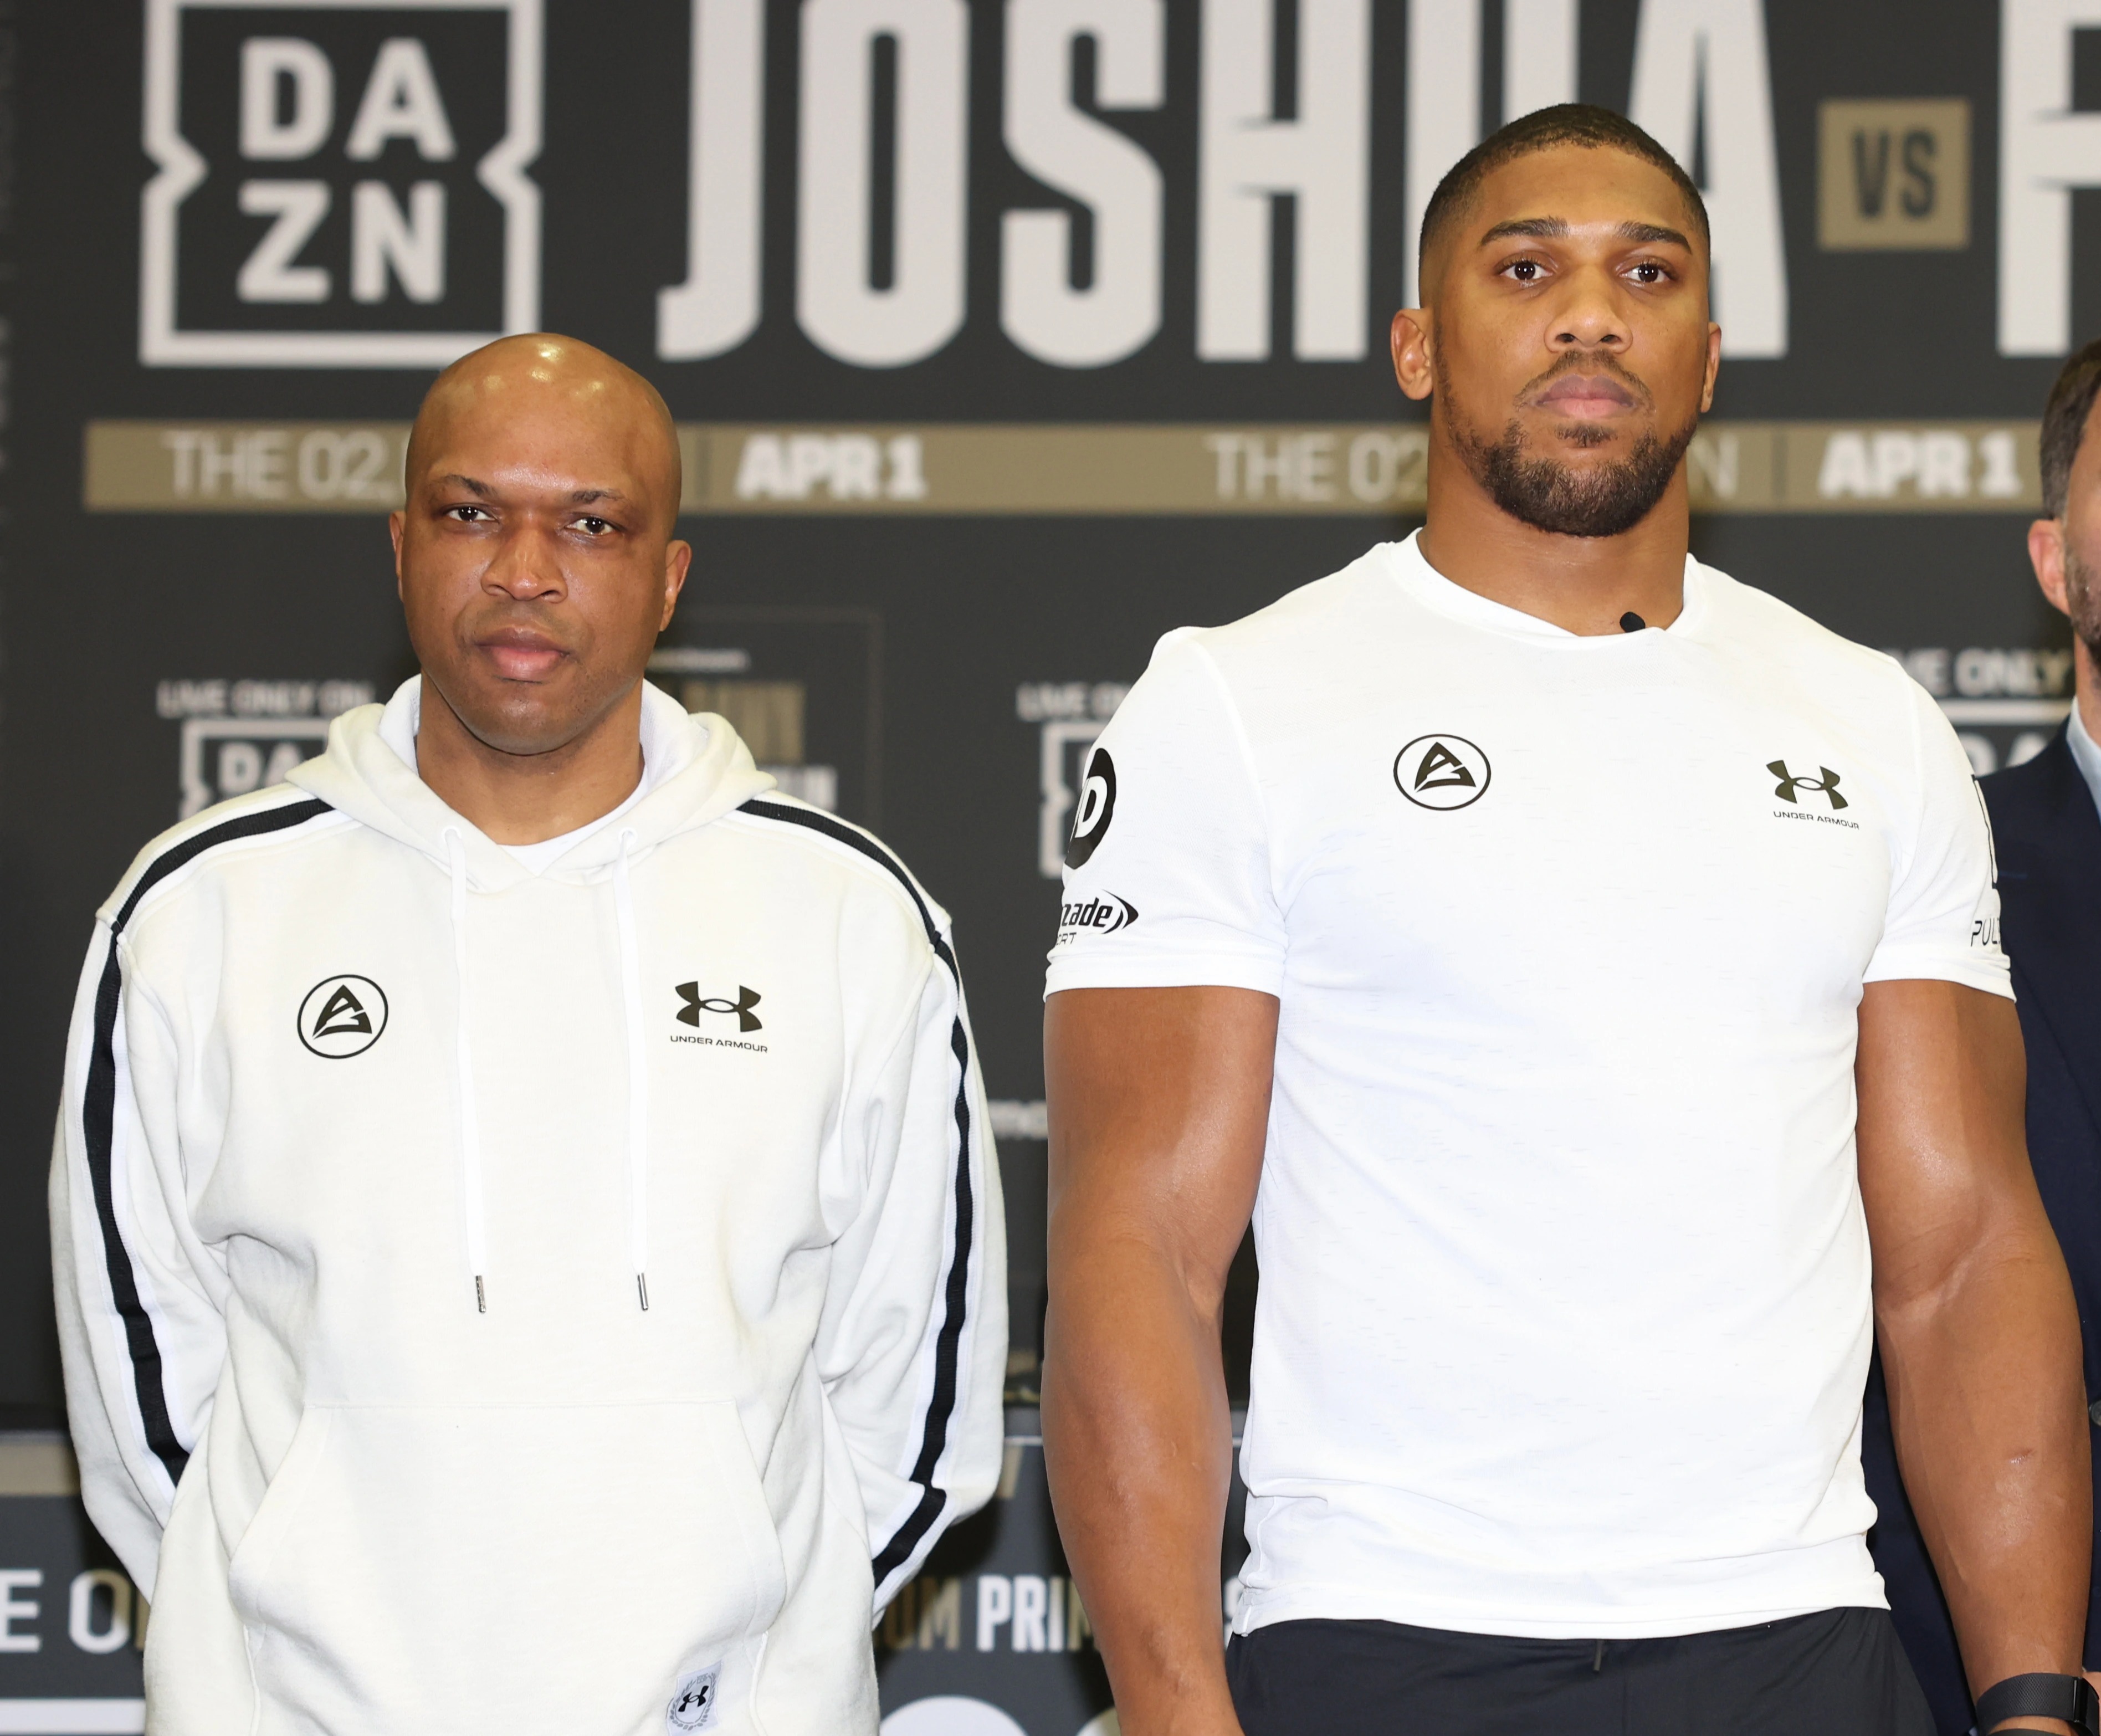 , Anthony Joshua no longer being treated ‘like God’ after training in an ‘extremely humble’ gym in Texas ahead of return